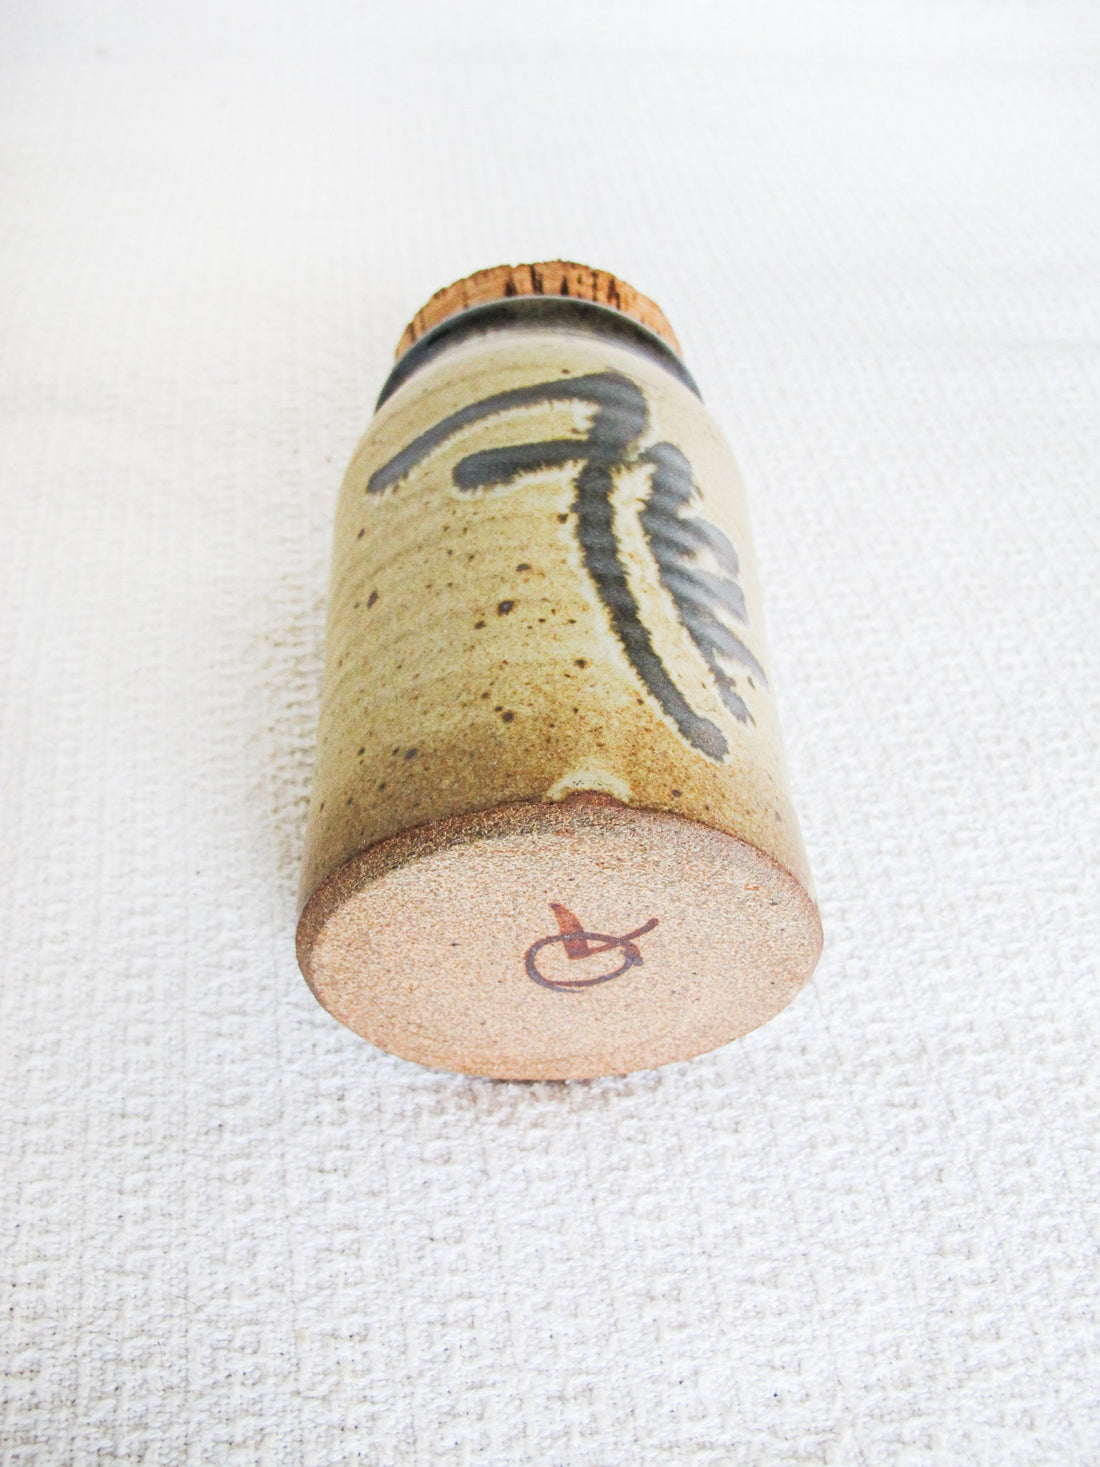 Ceramic Spice Canister Jar with Cork Lid